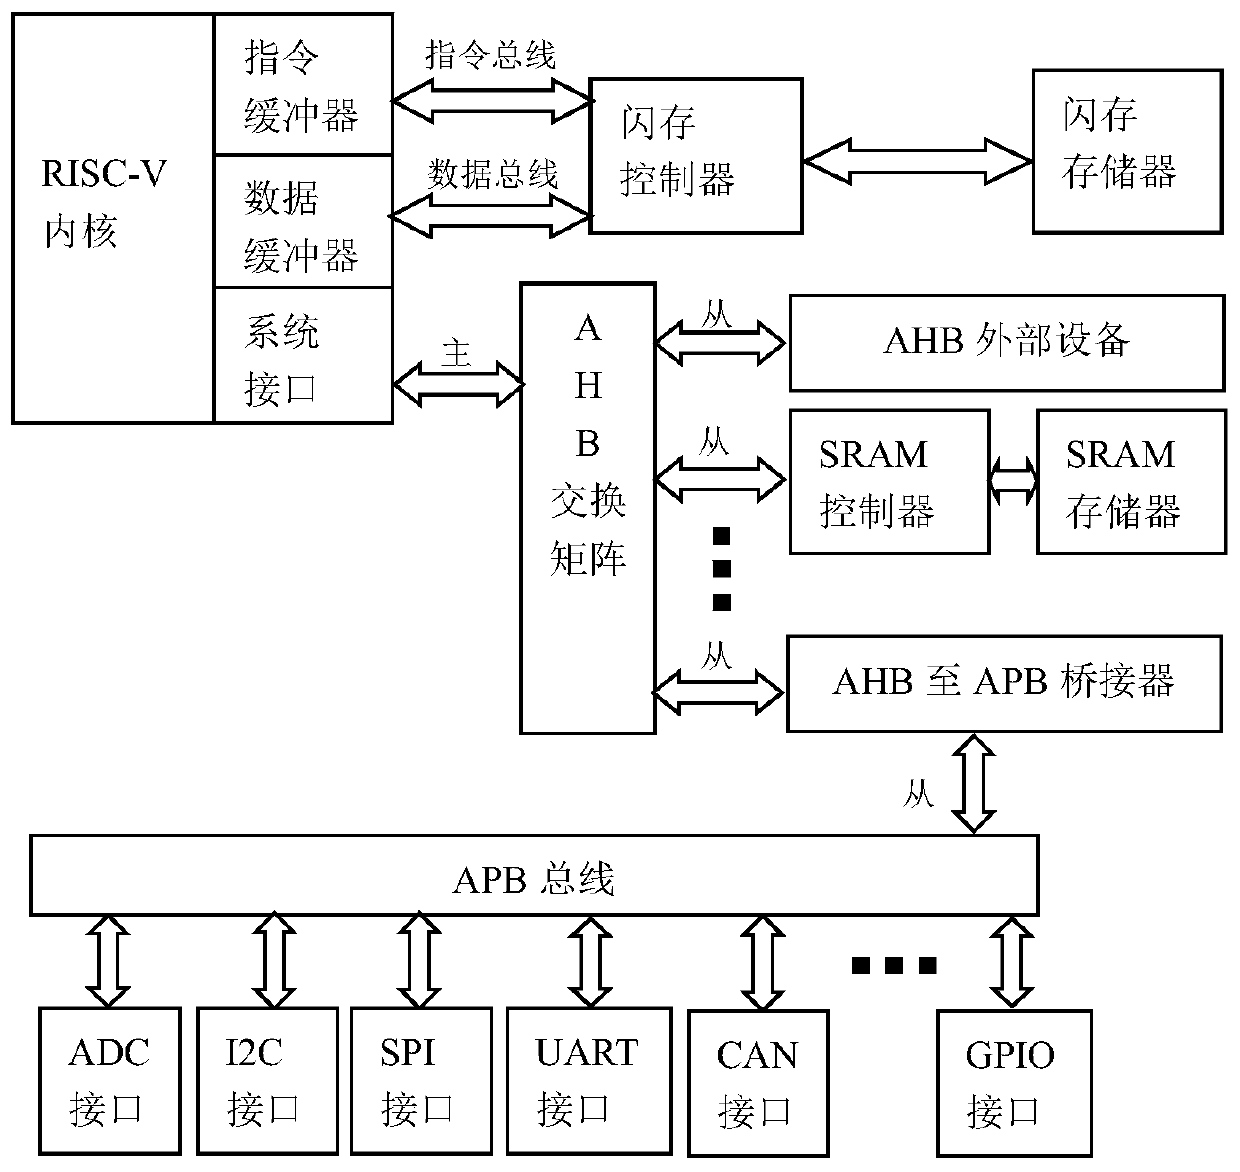 Information model modeling and generating method of microprocessor